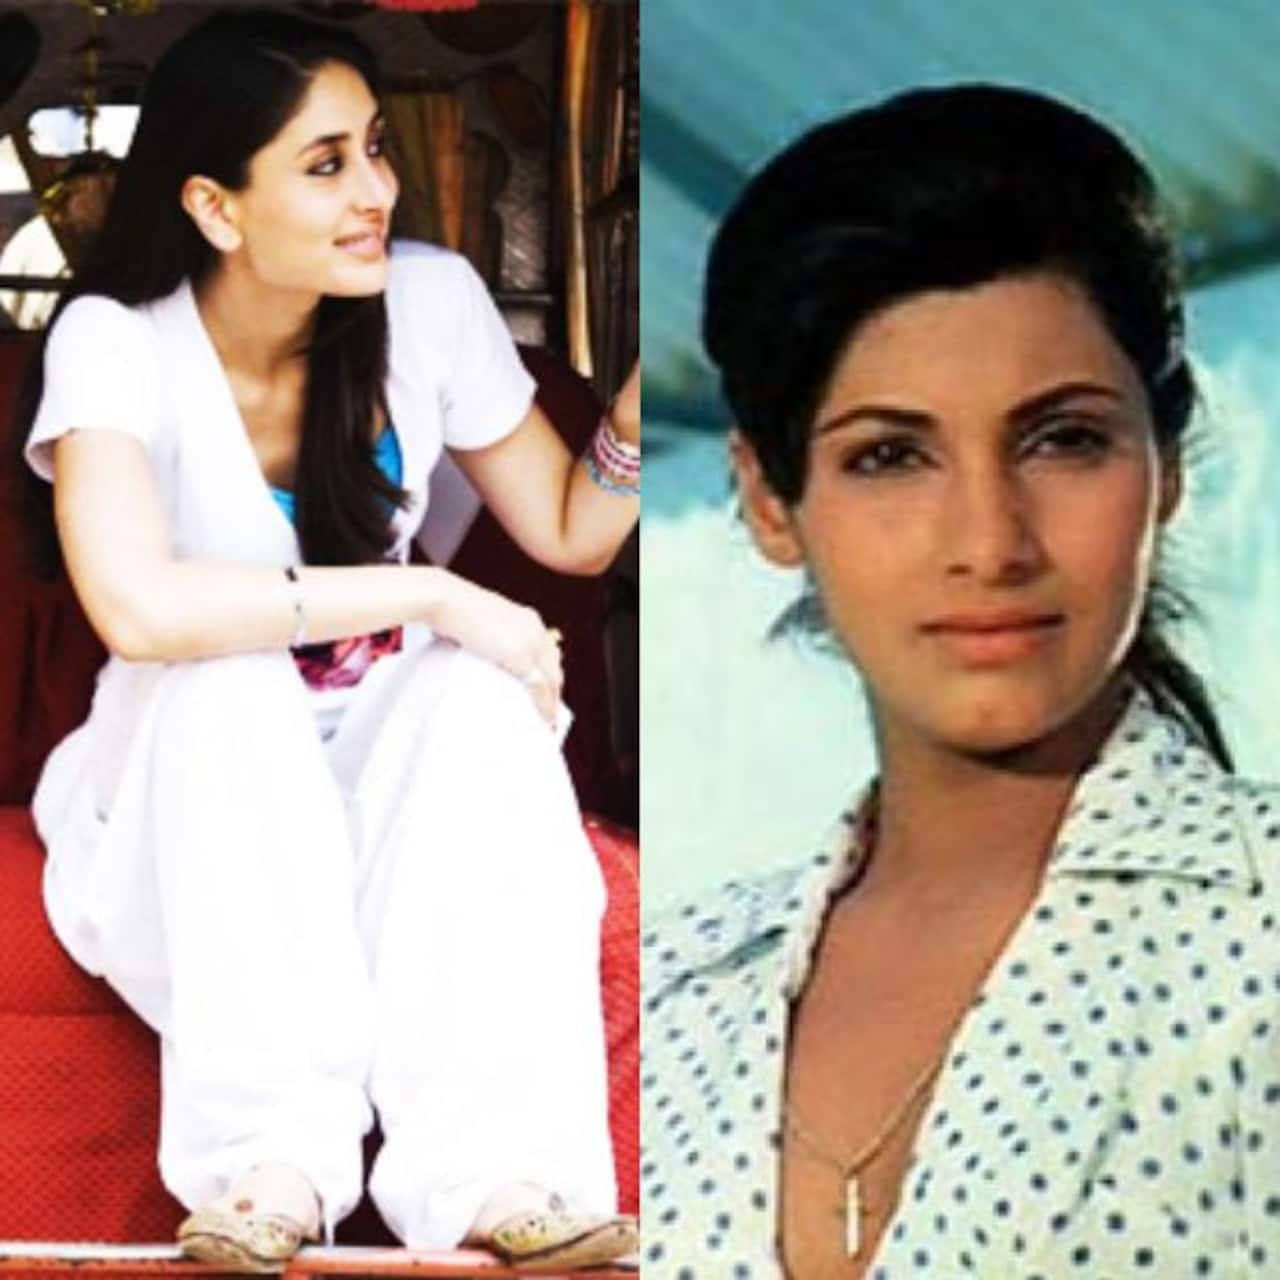 From Kareena Kapoor's patialas in Jab We Met to Dimple Kapadia's polka dots  in Bobby: 7 iconic looks from Bollywood films that became trends